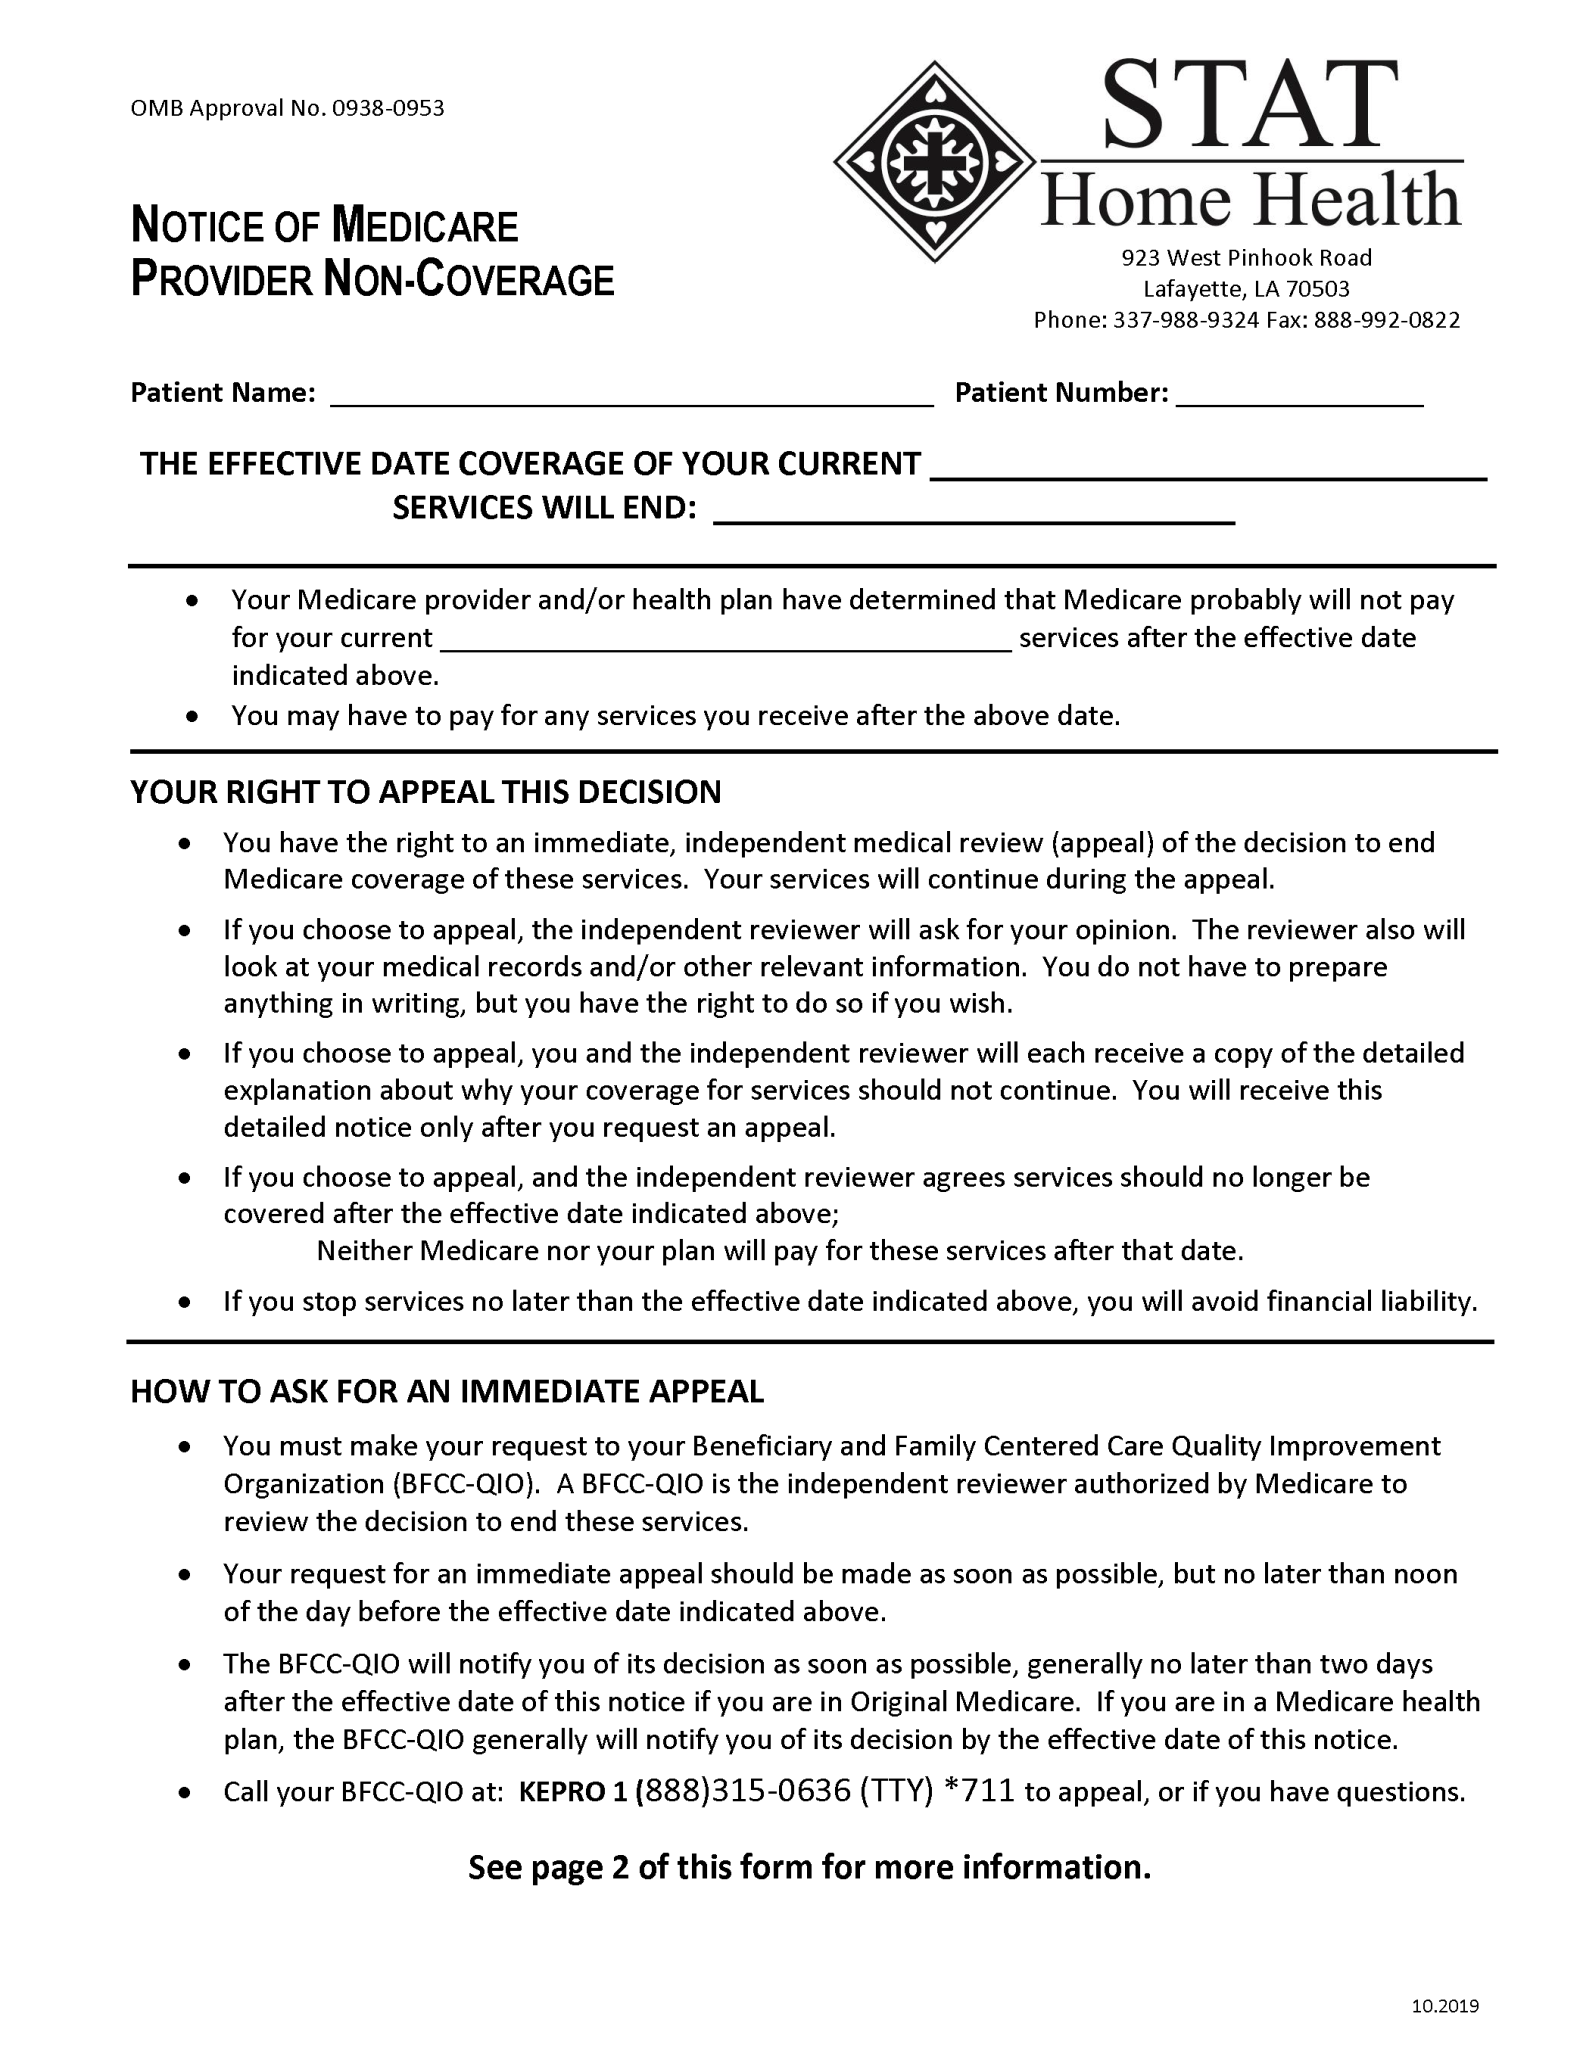 Notice of Medicare Non Coverage STAT Lafayette [2Part Forms with 2